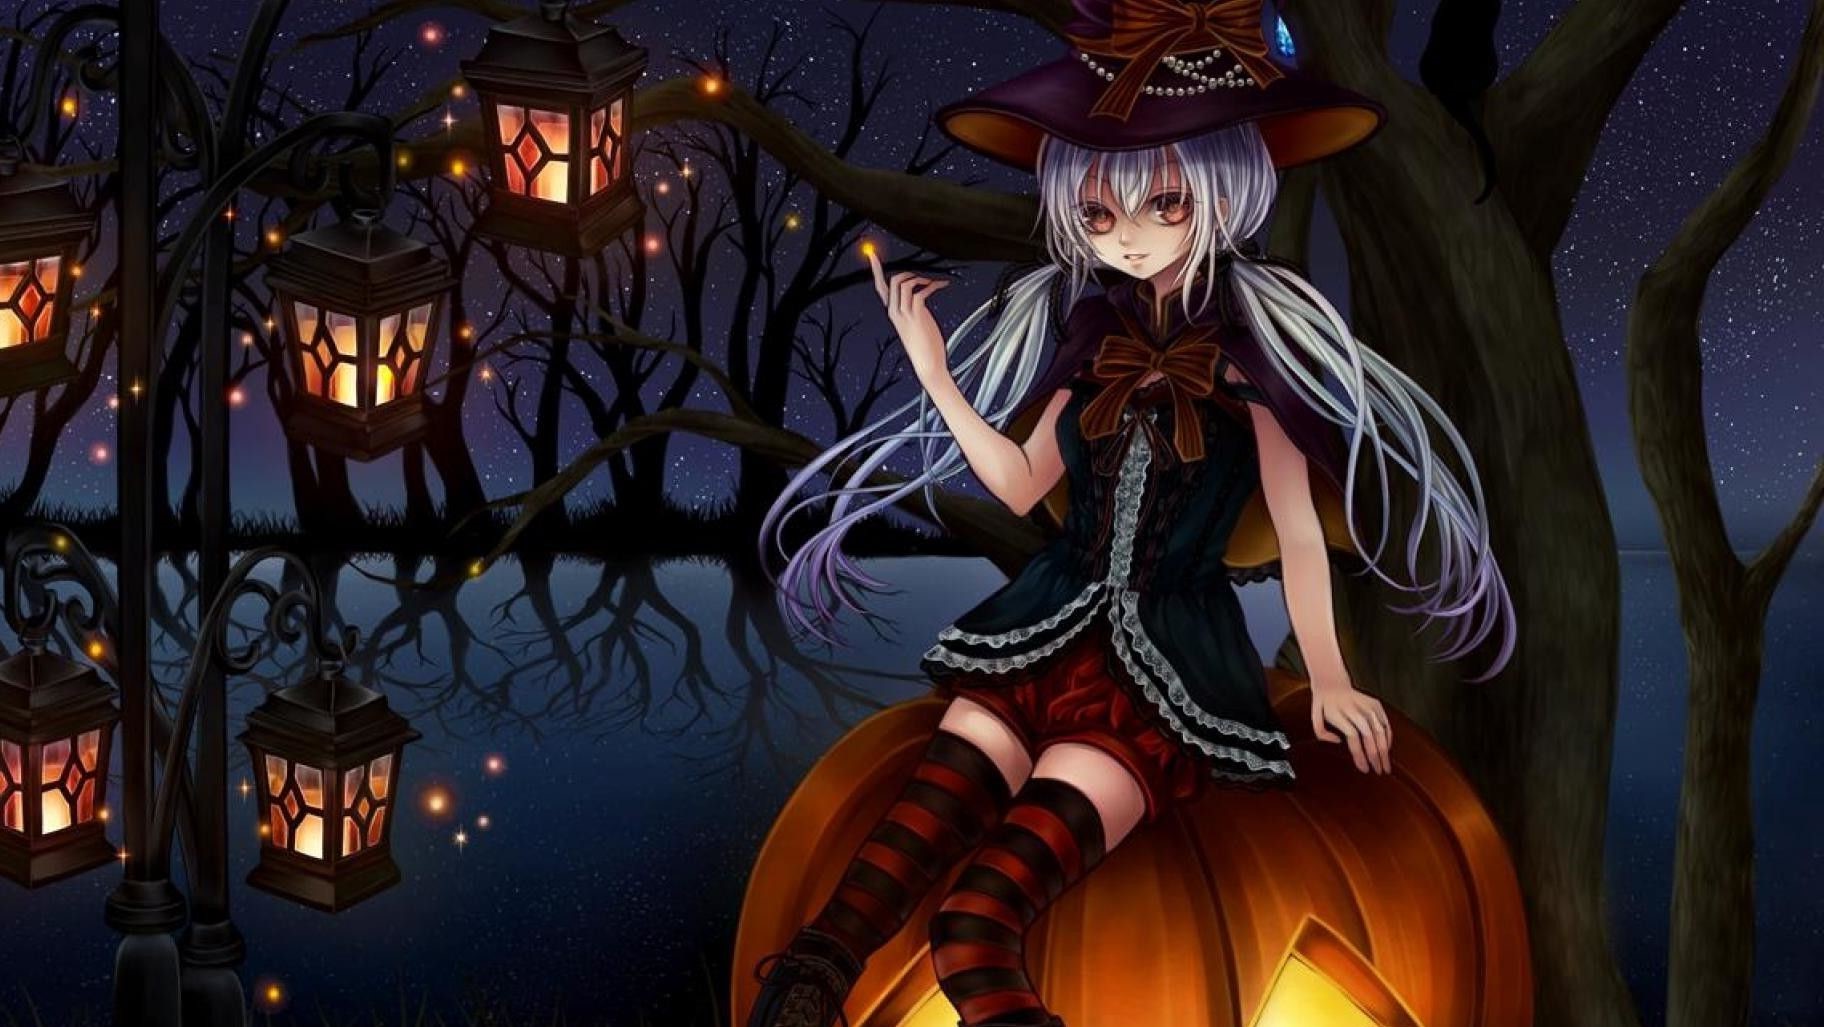 Trick Or Treat From Two Anime Witches 4K wallpaper download